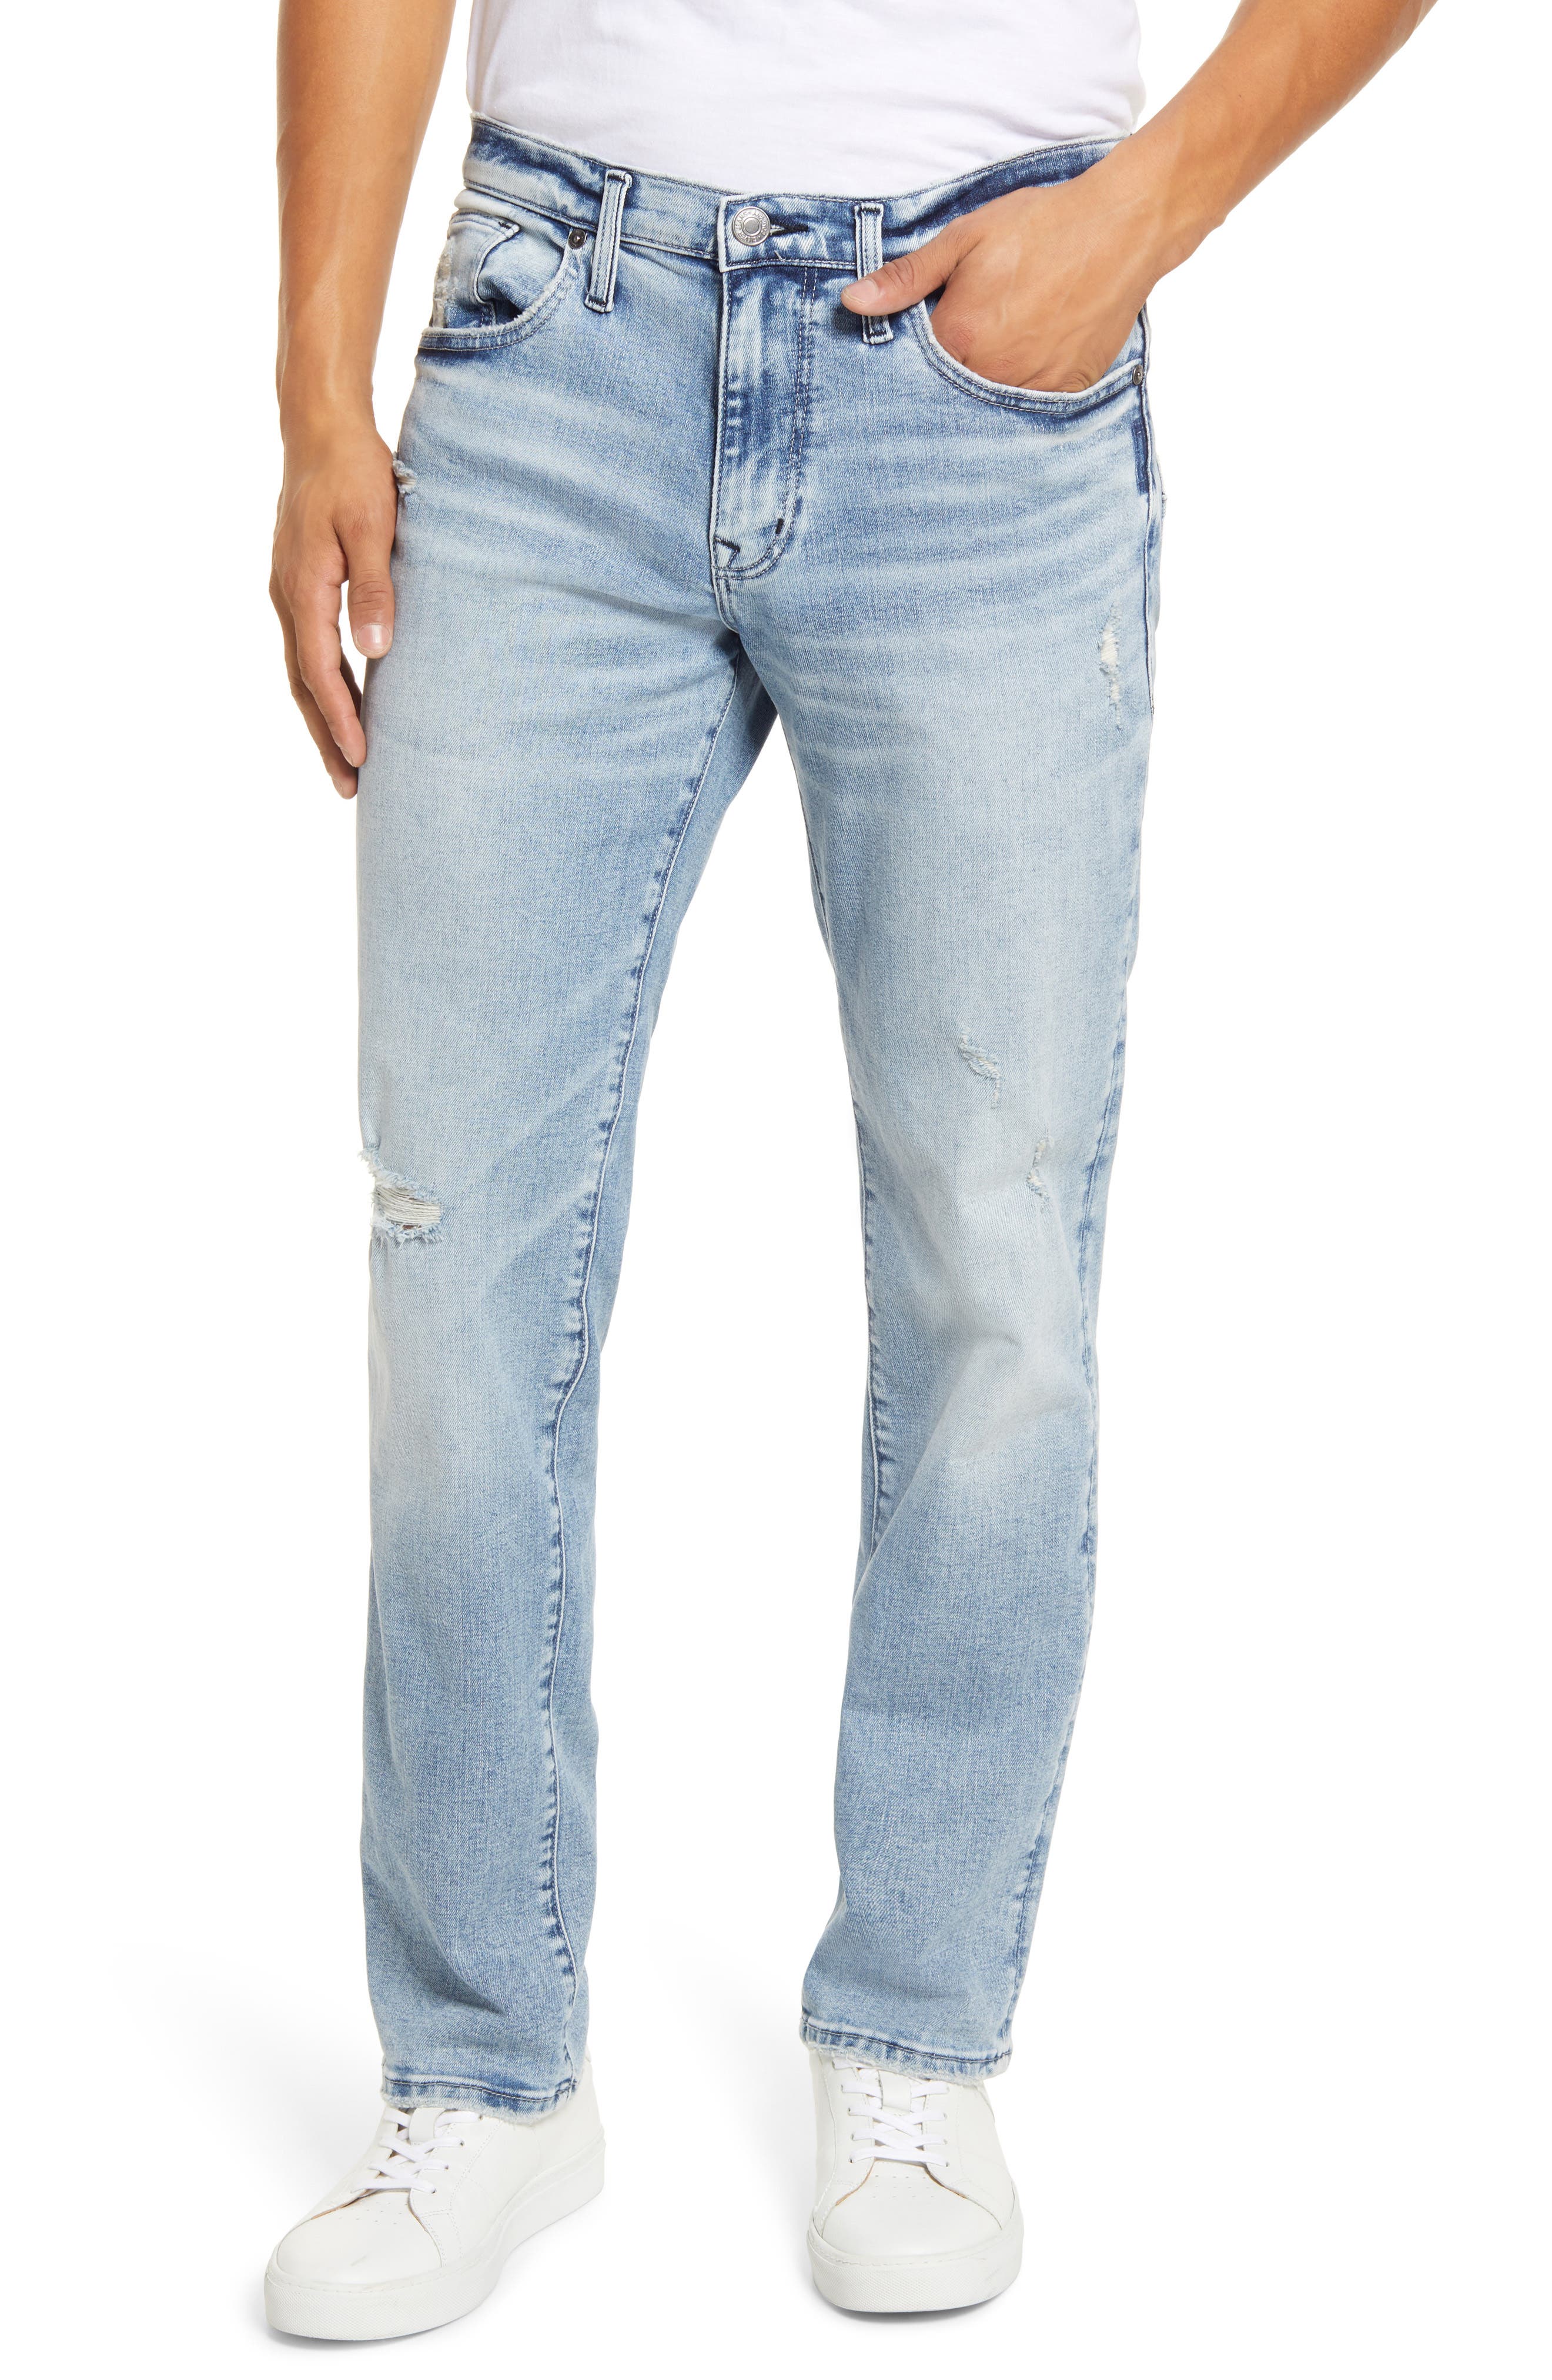 next ripped jeans mens